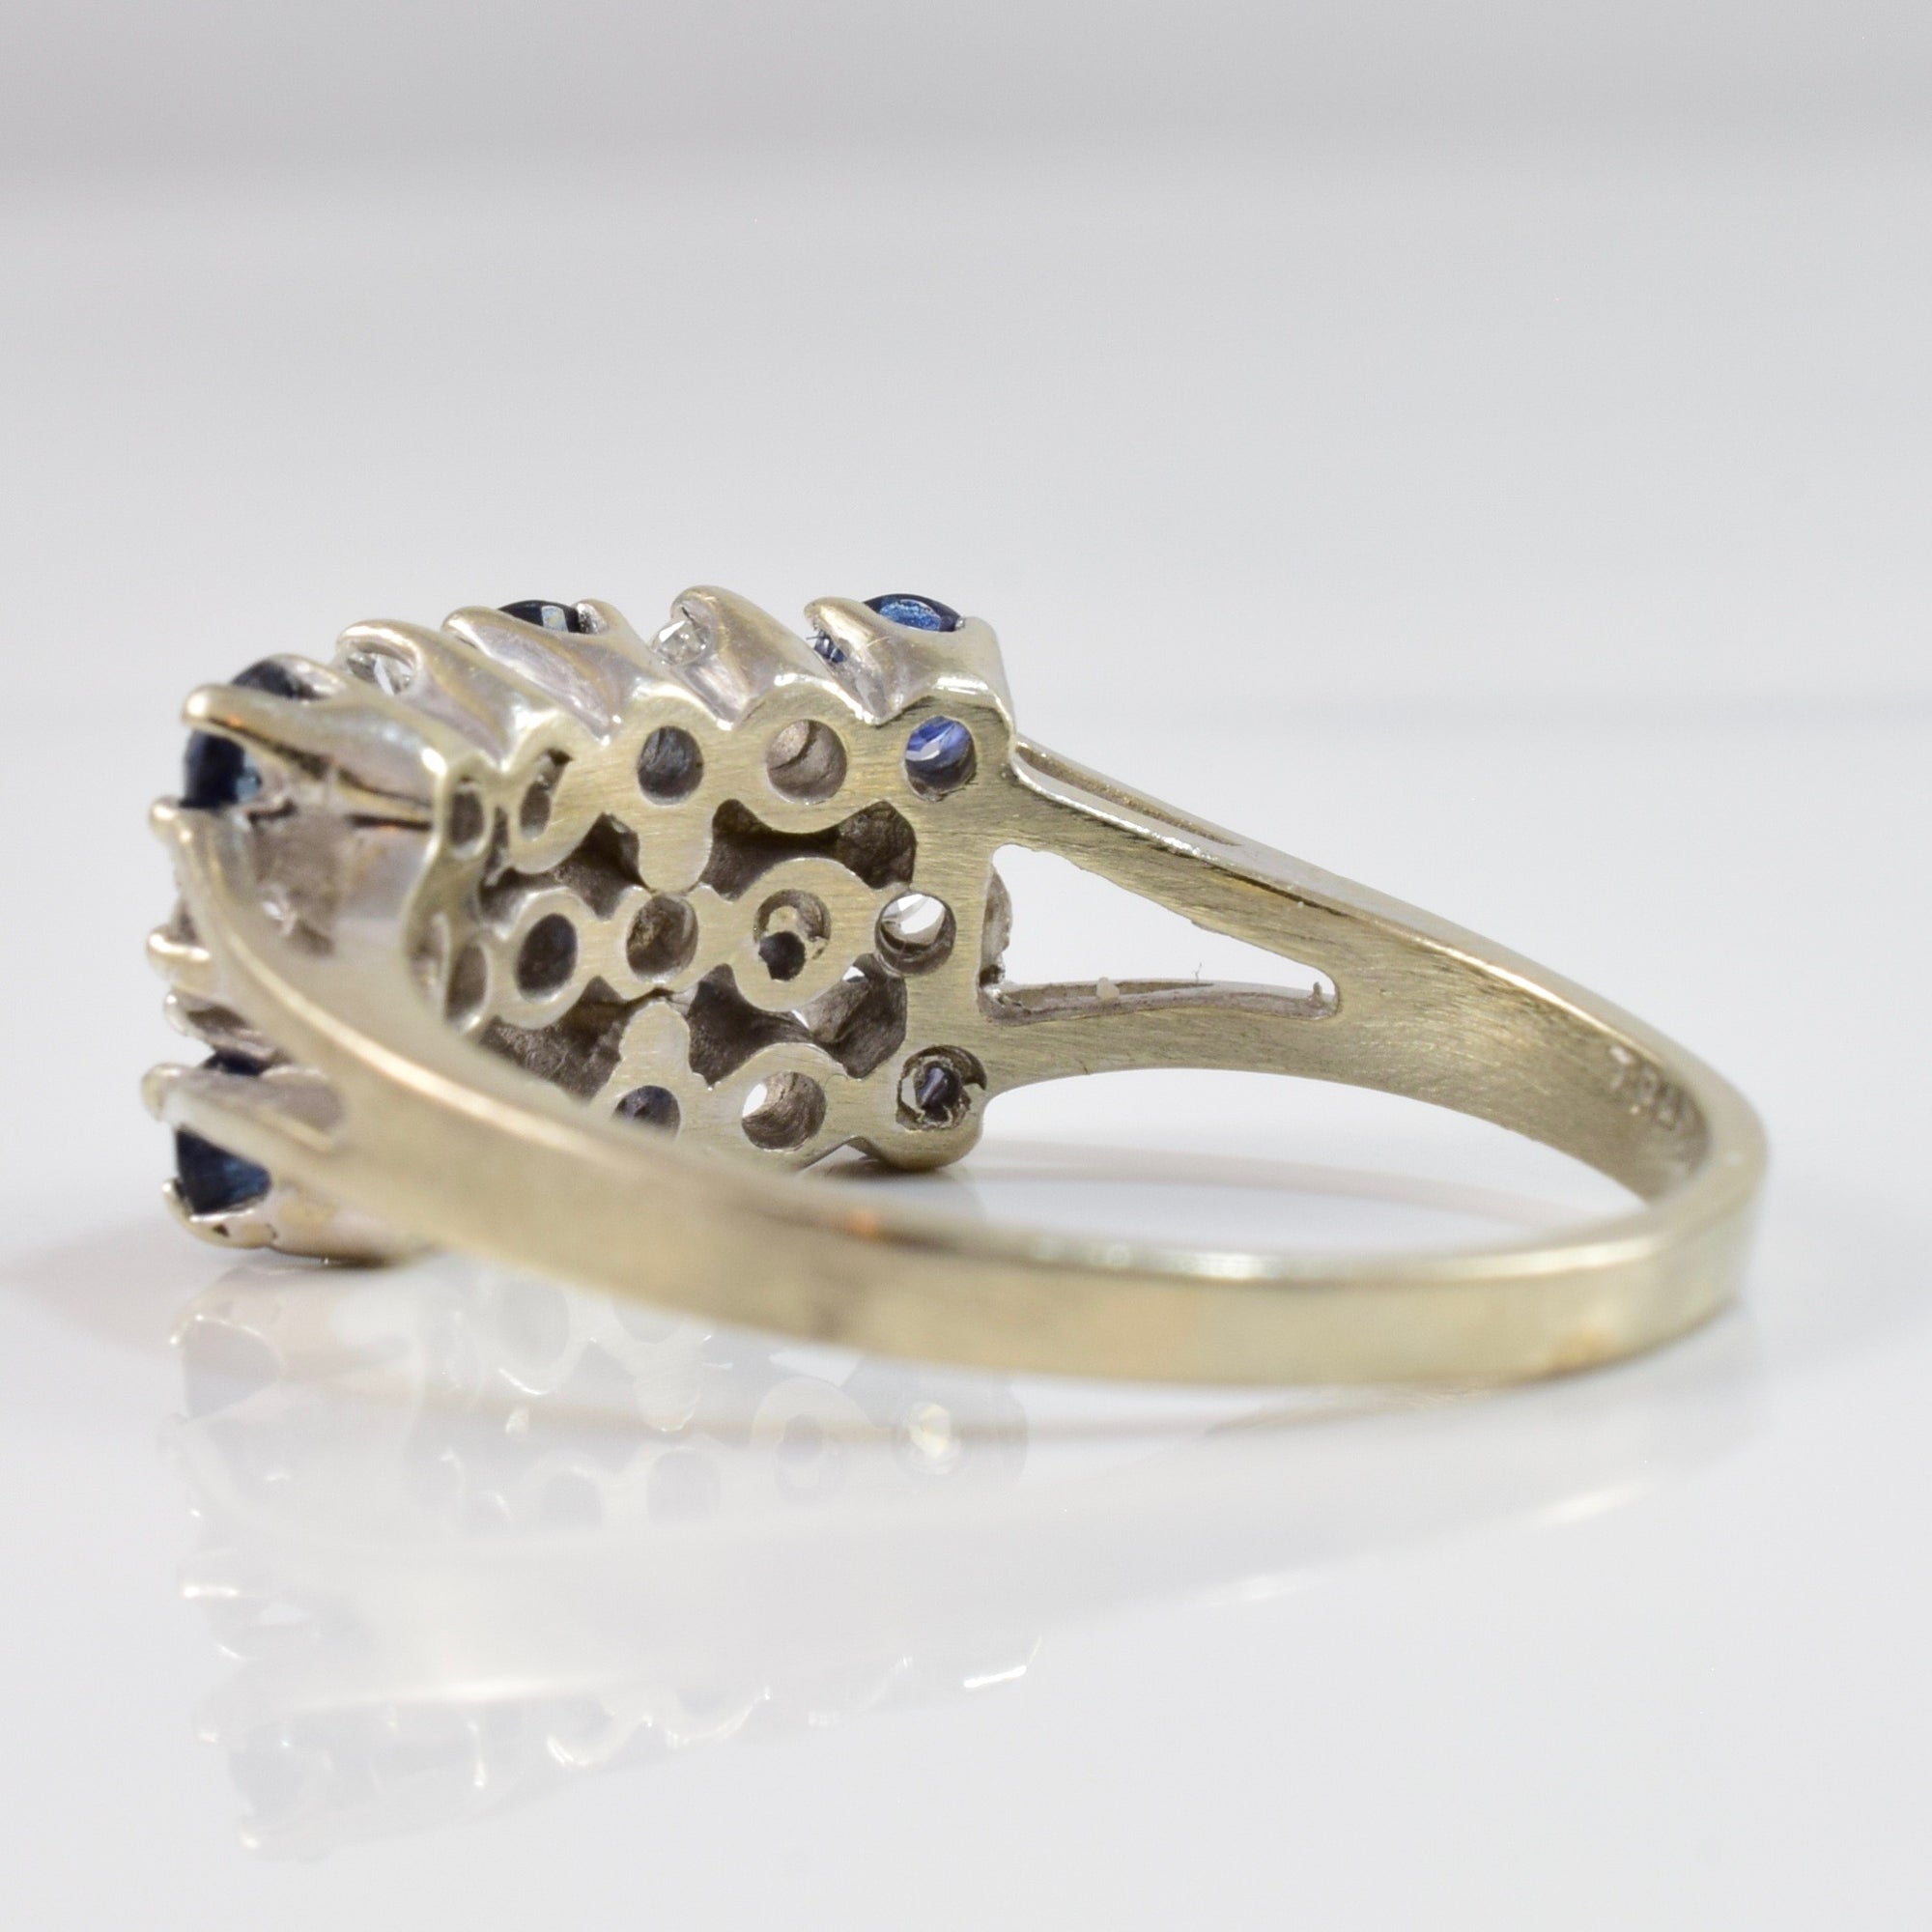 Sapphire and Diamond Cluster Ring | 0.17 ctw SZ 6 |